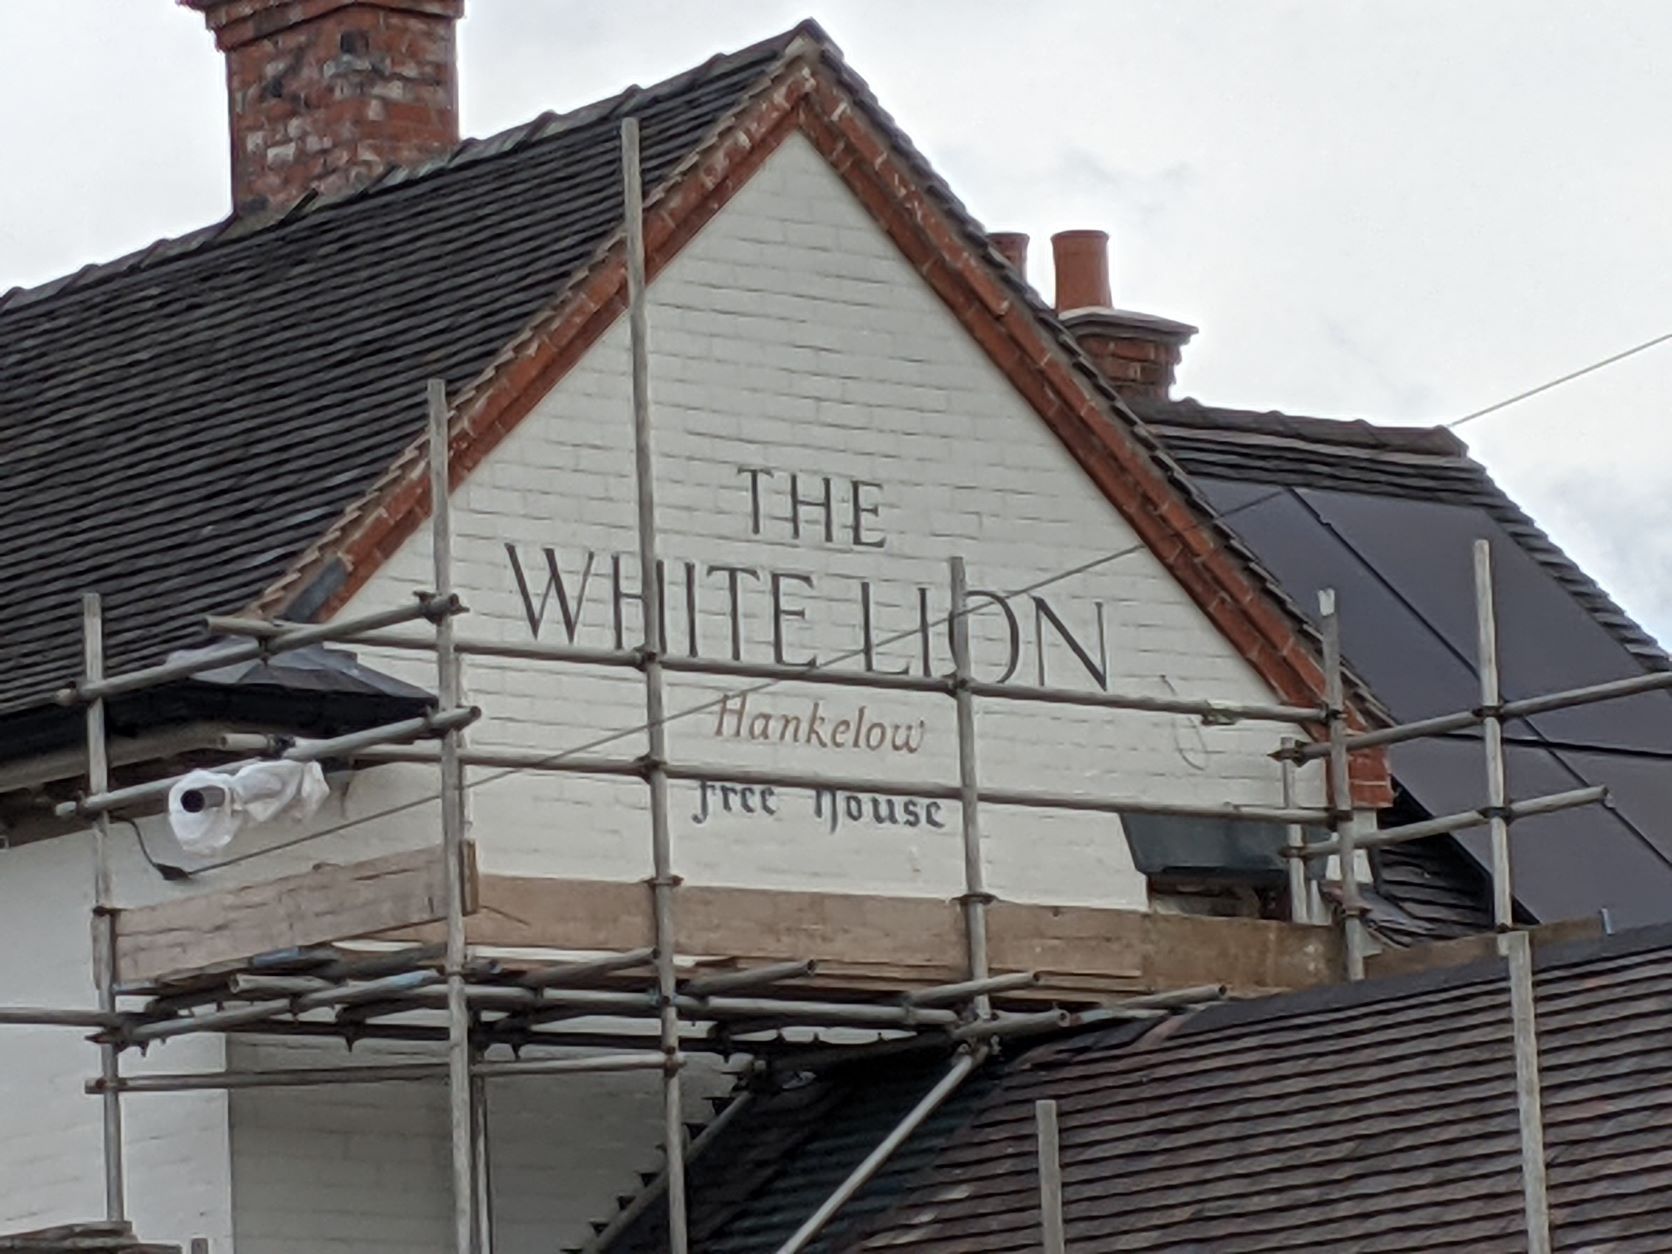 Signwriting on the Lion, October 28th